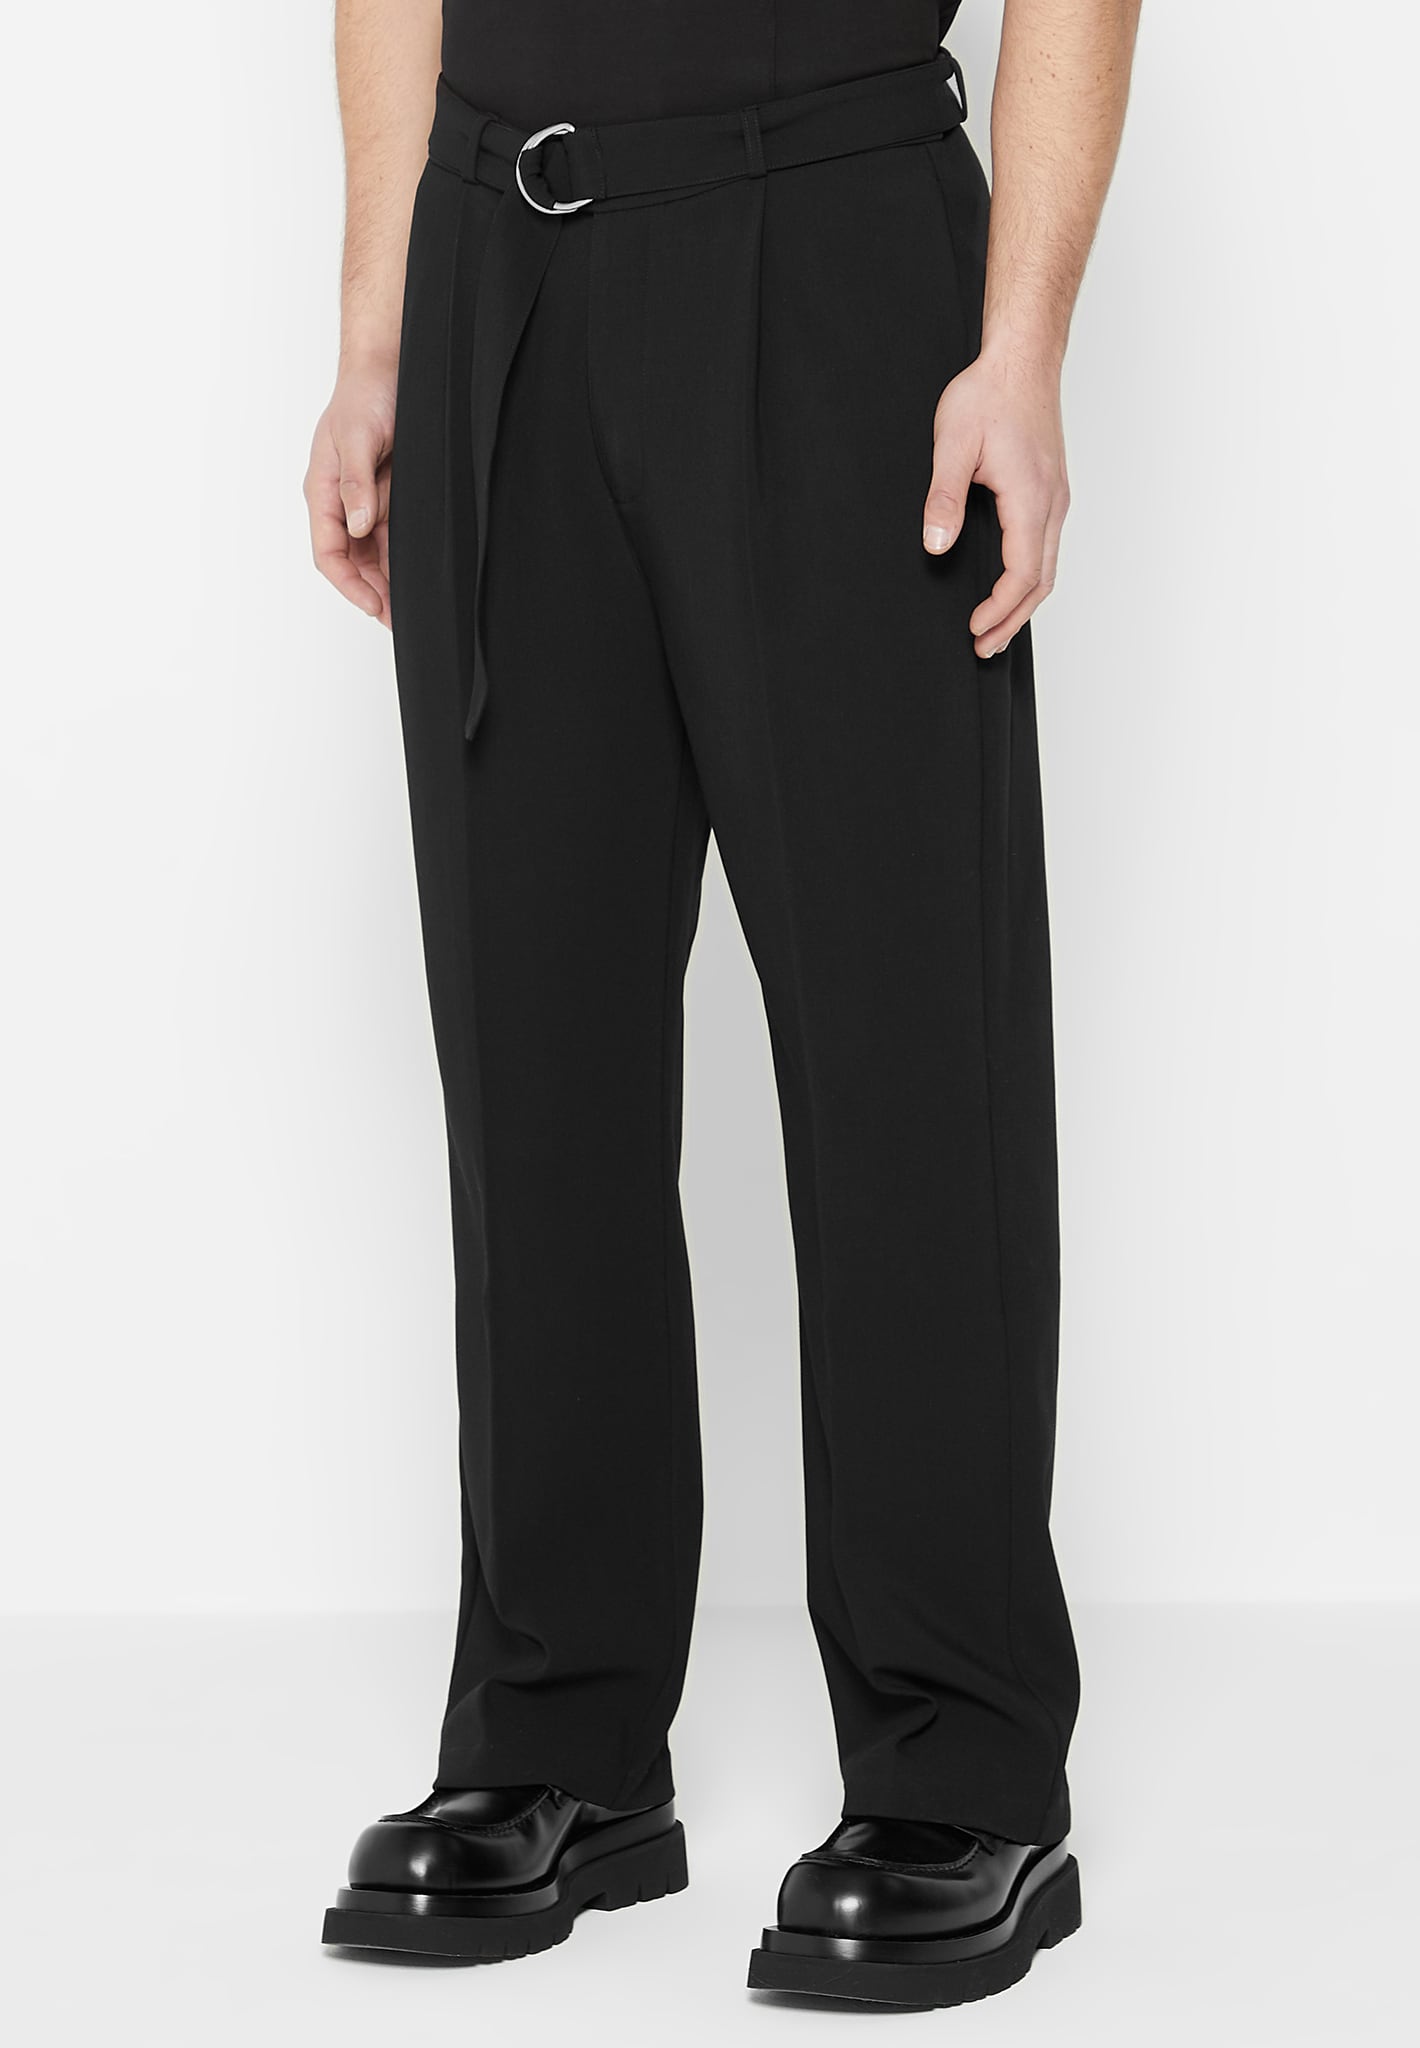 SOLID HOMME, Pleated Belted Pants, Men